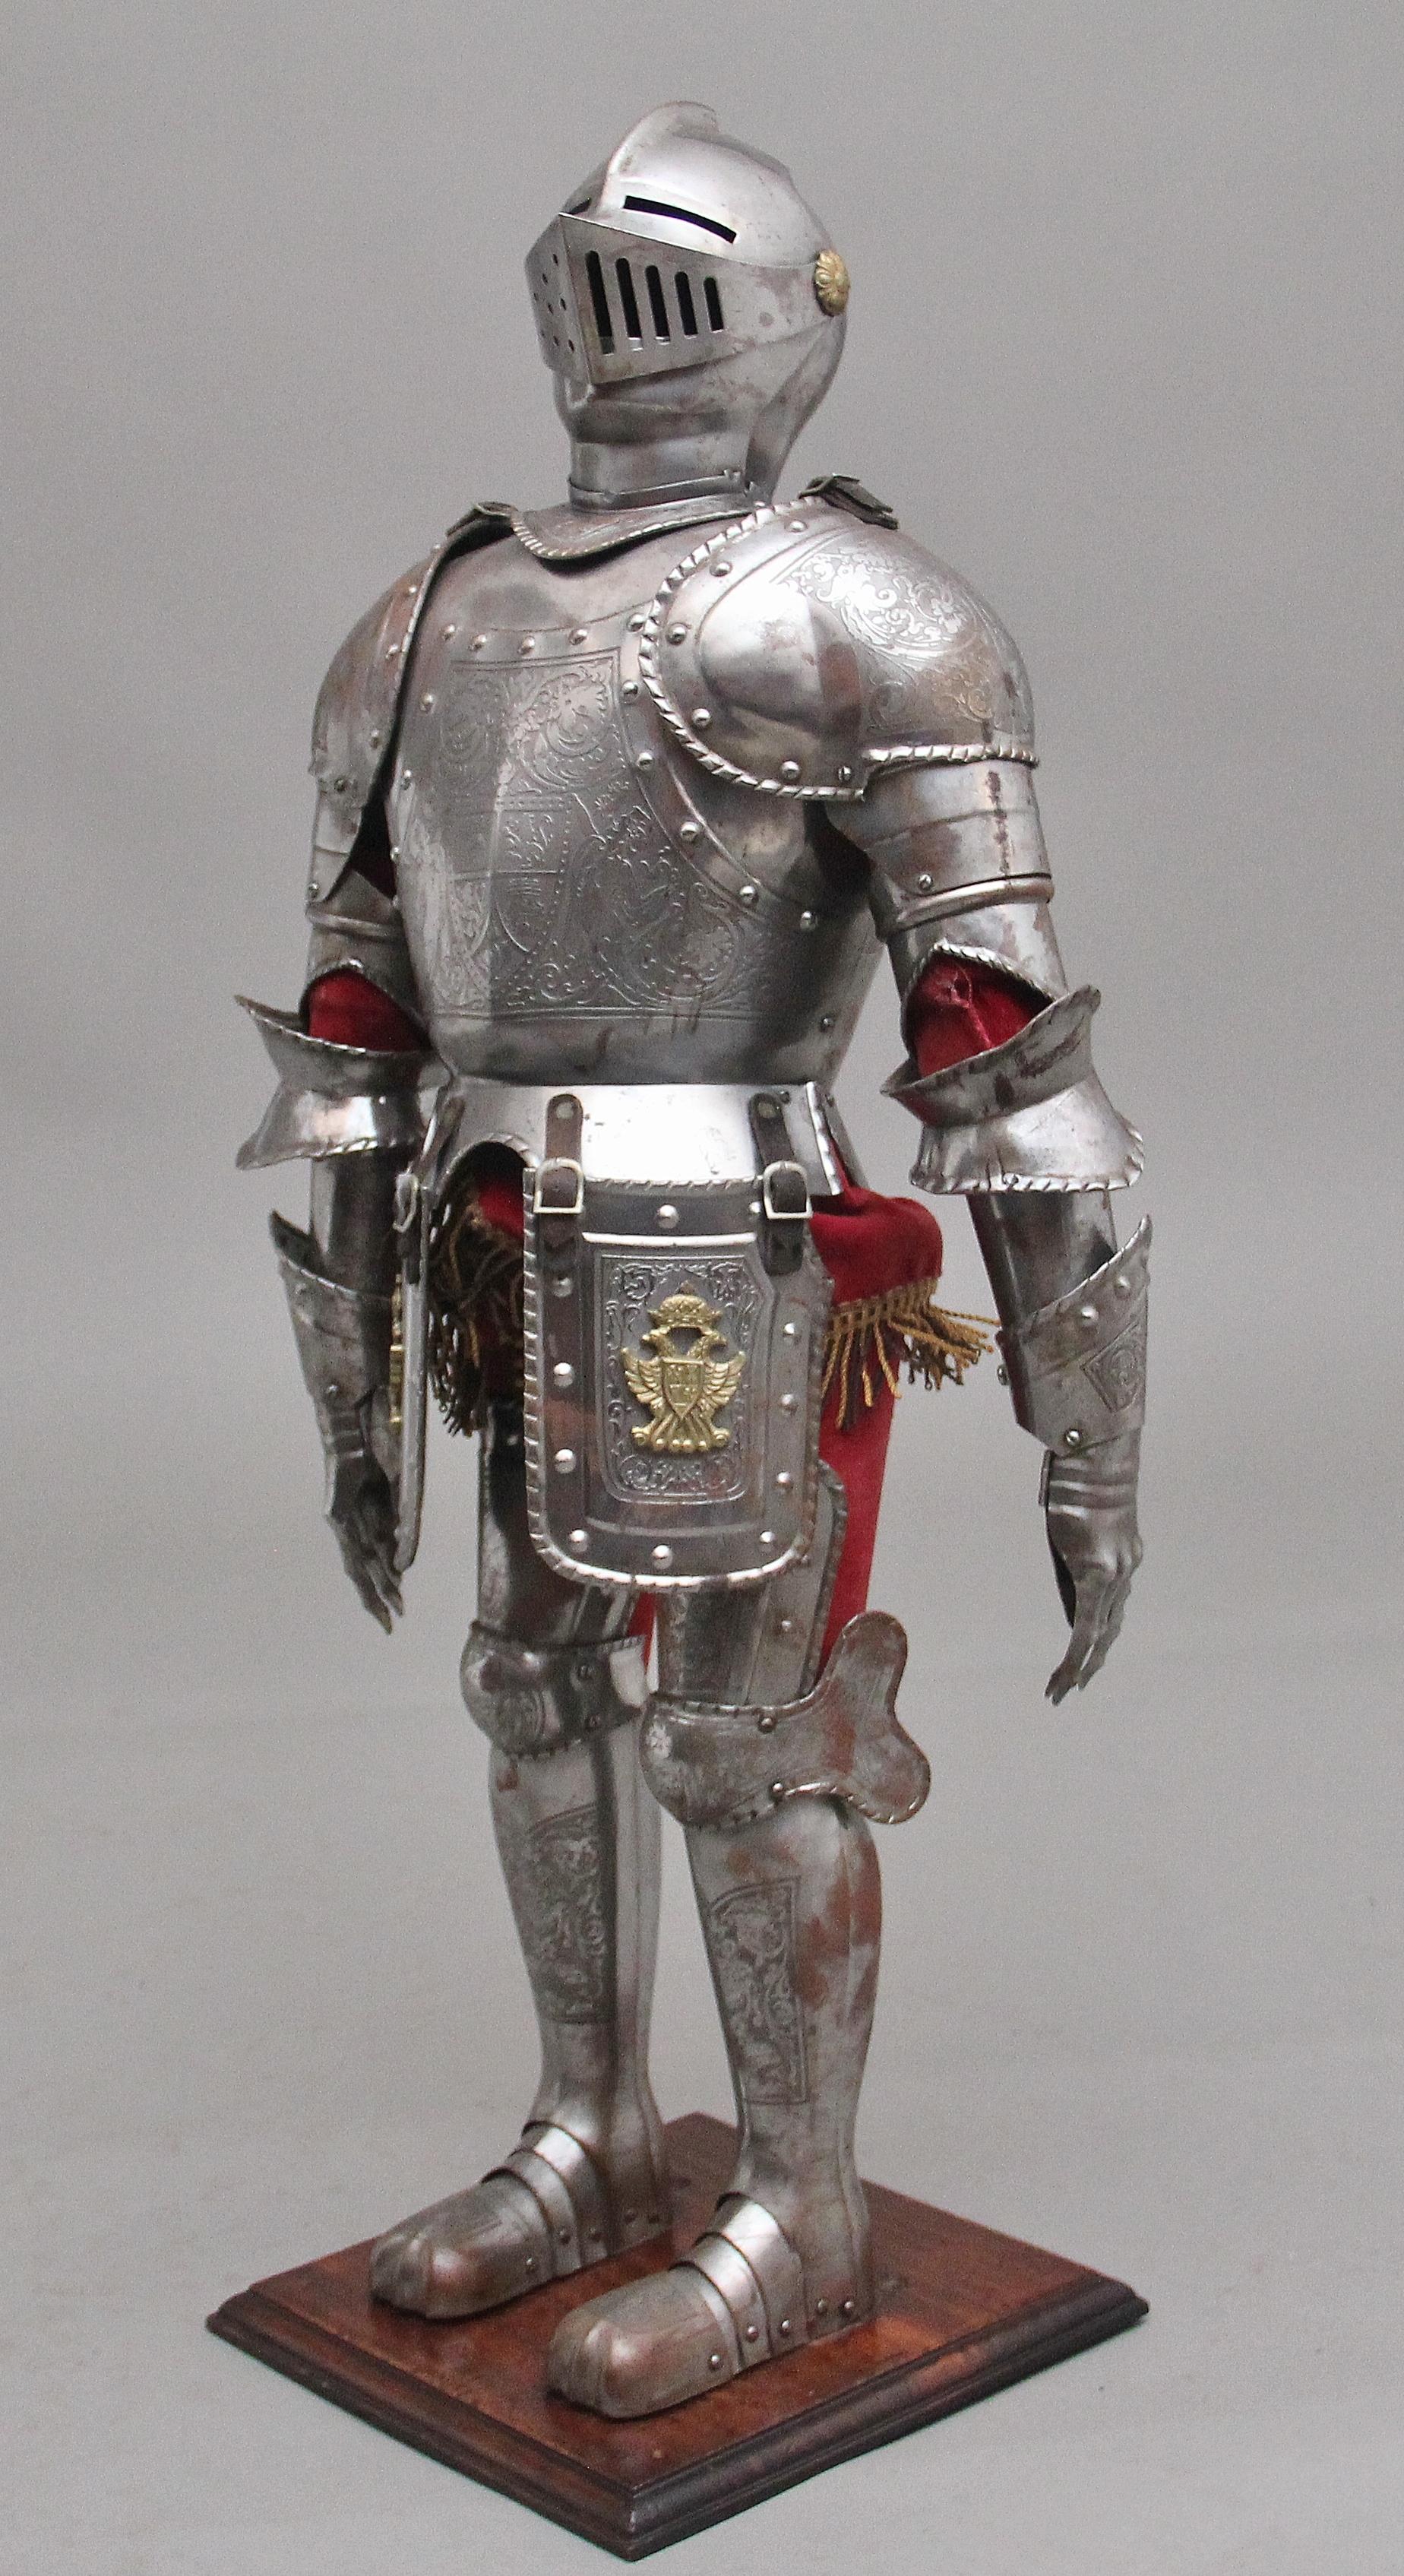 An impressive early 20th miniature suit of armour in the 16th century style, possibly German, the helmet is adjustable and has gold coloured patraes either side, the suit of armour has detailed engraving throughout and includes gold coloured coat of